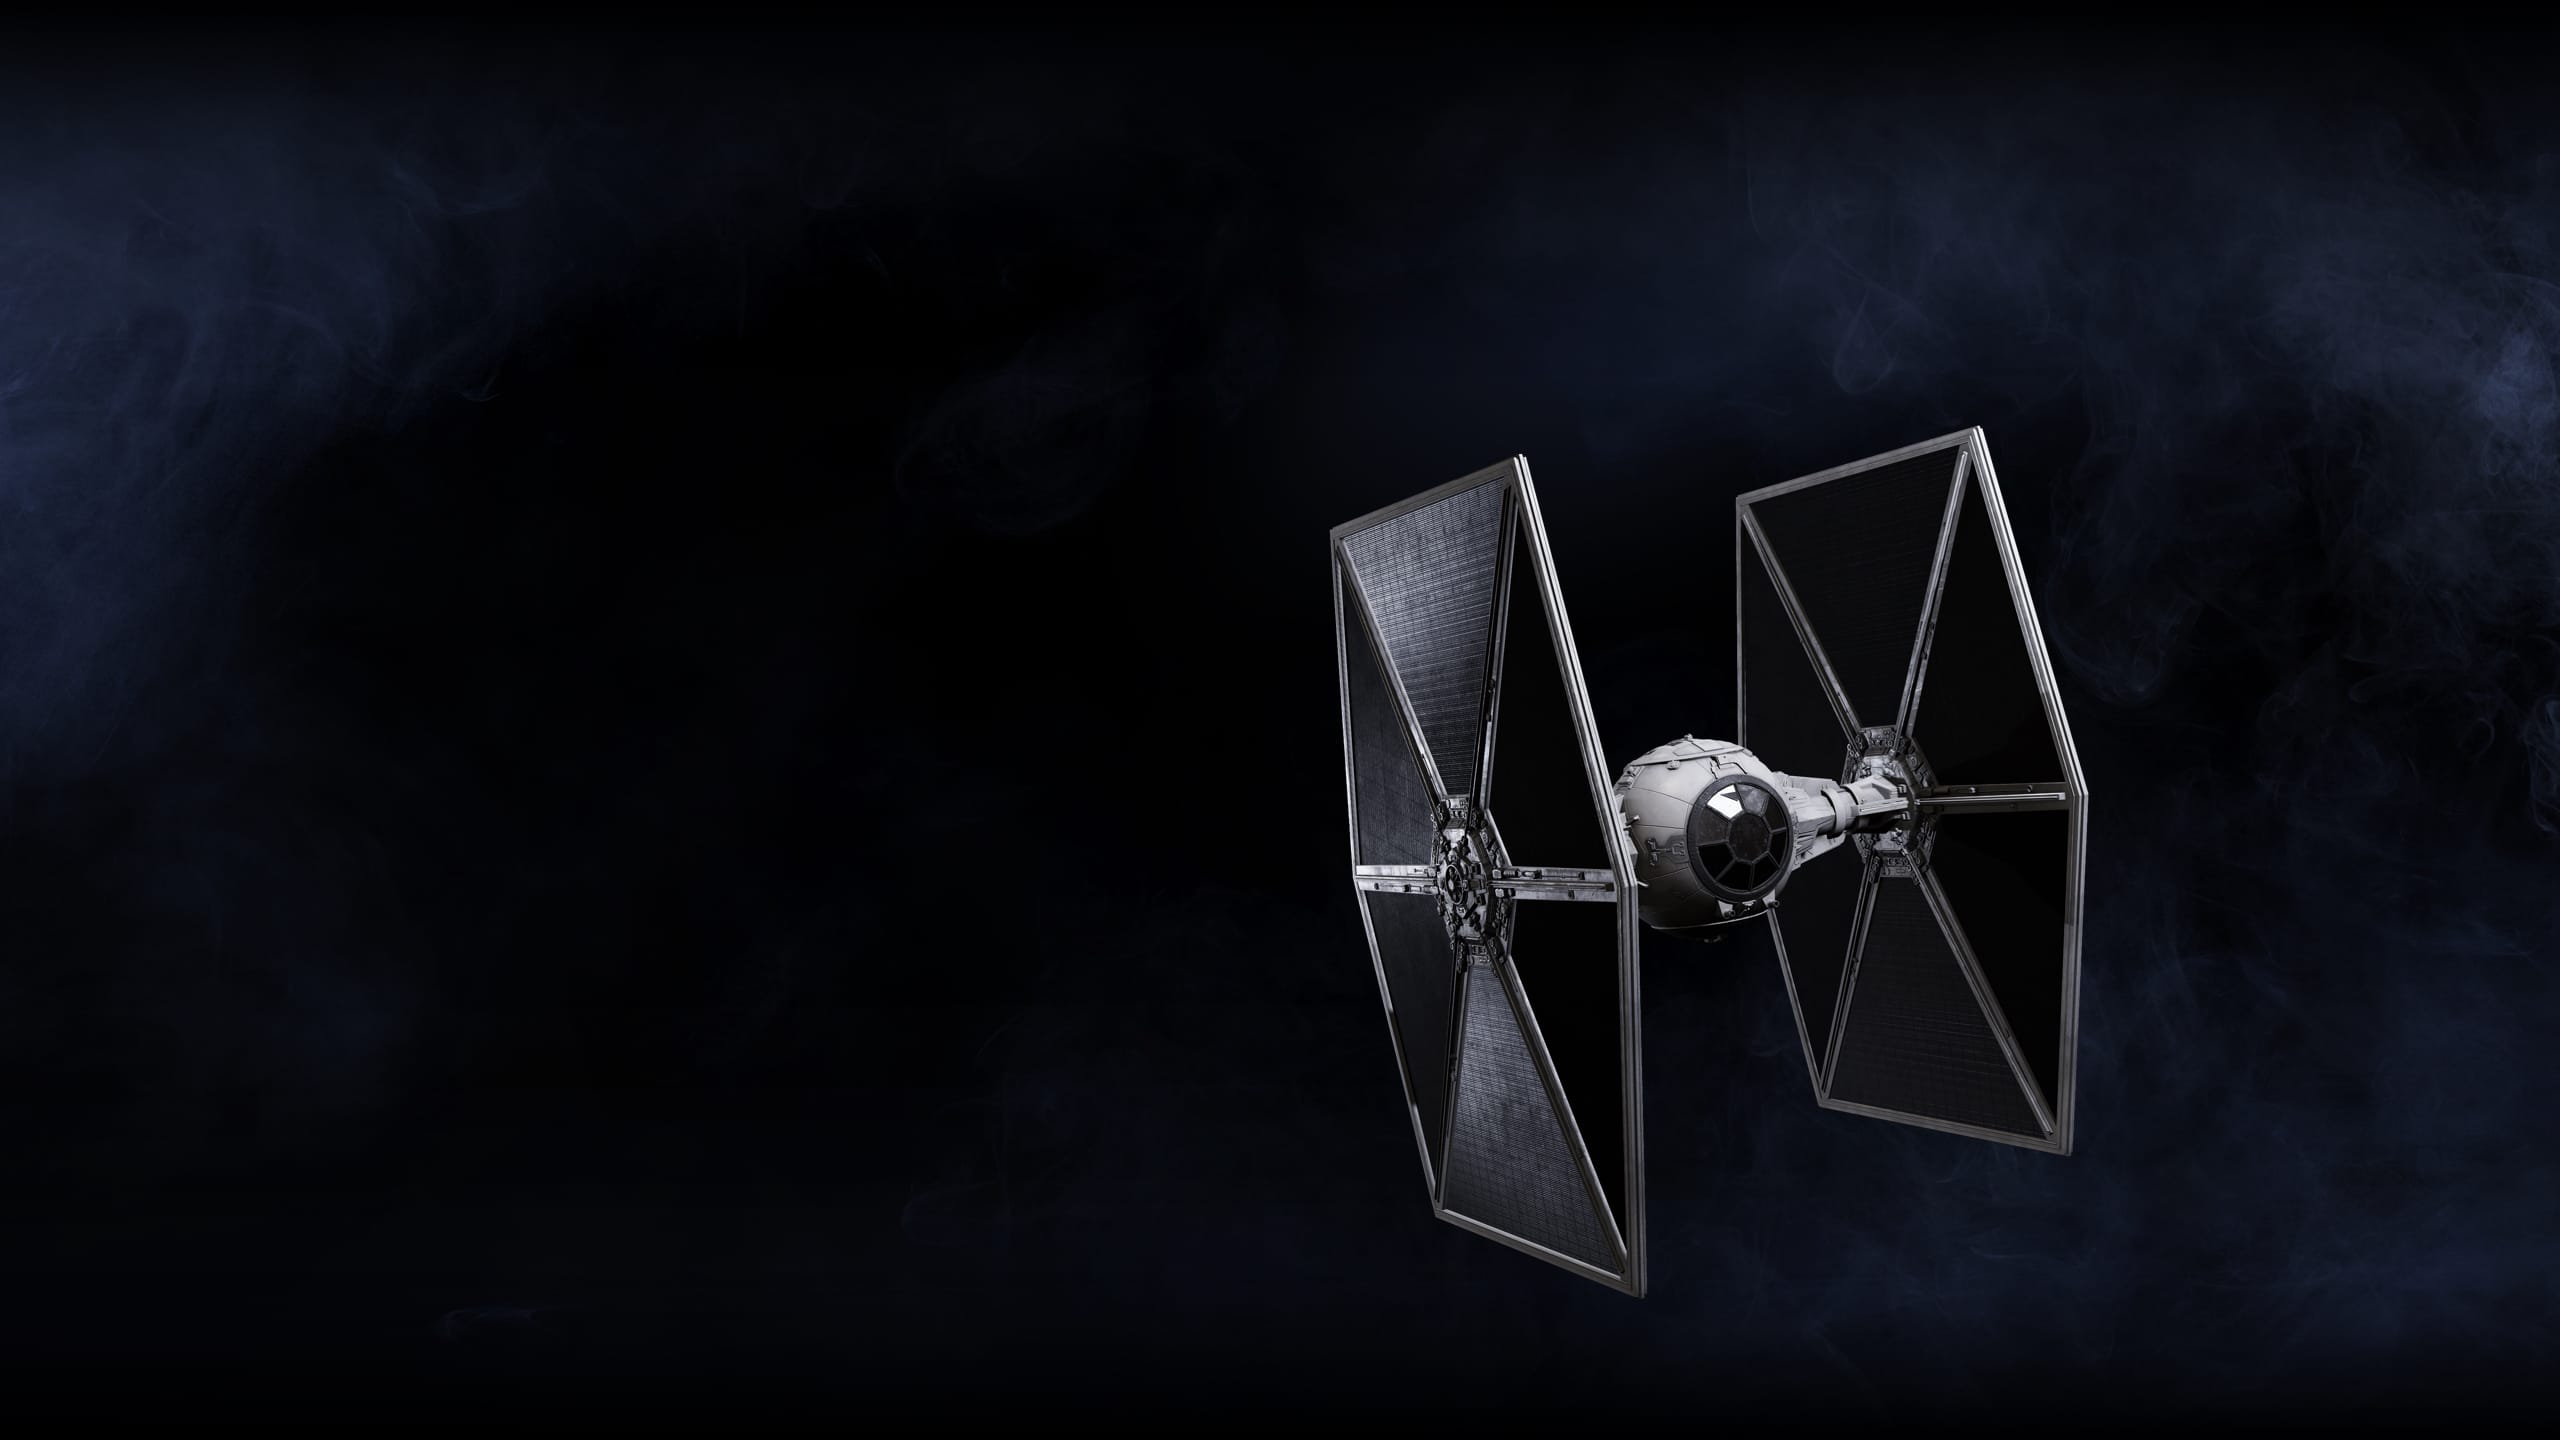 Le chasseur Tie Fighter